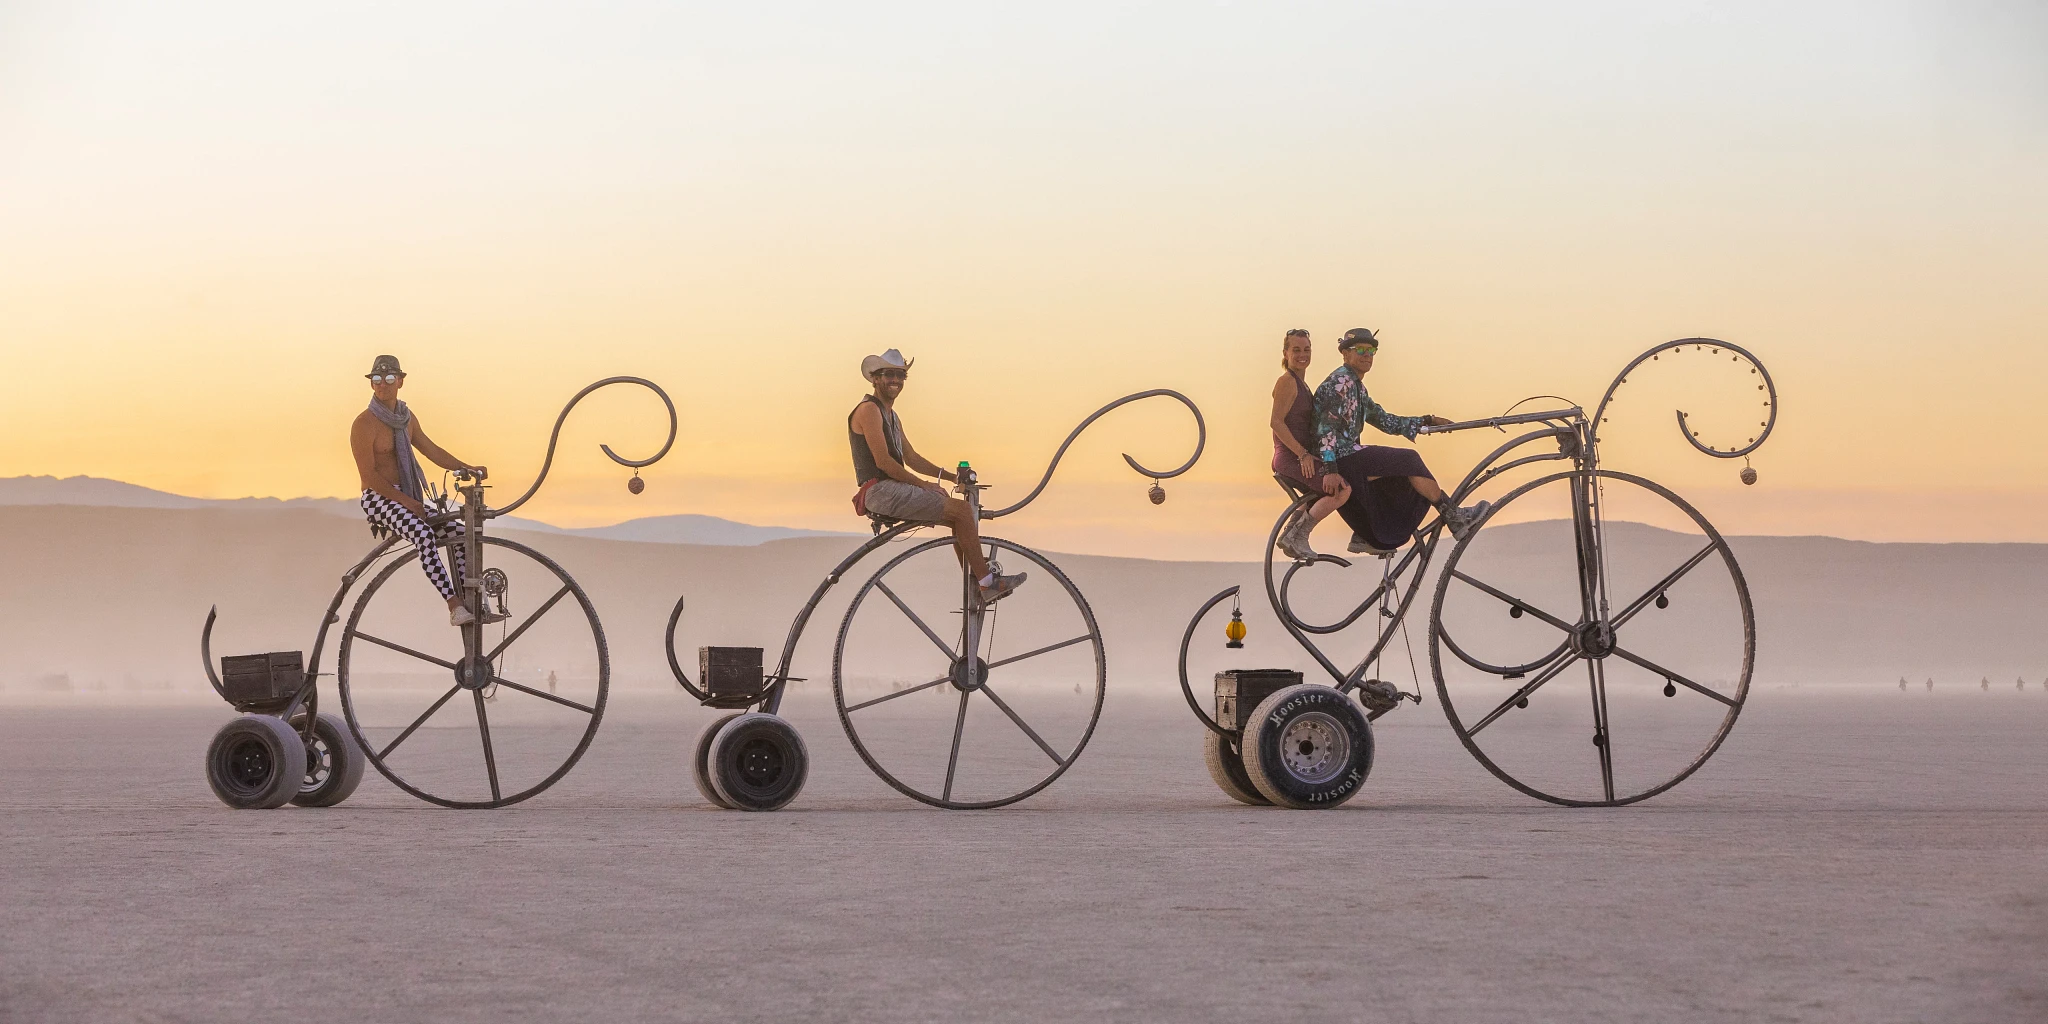 3 mutant bikes in penny farthing style against the backdrop of the Playa at sunset